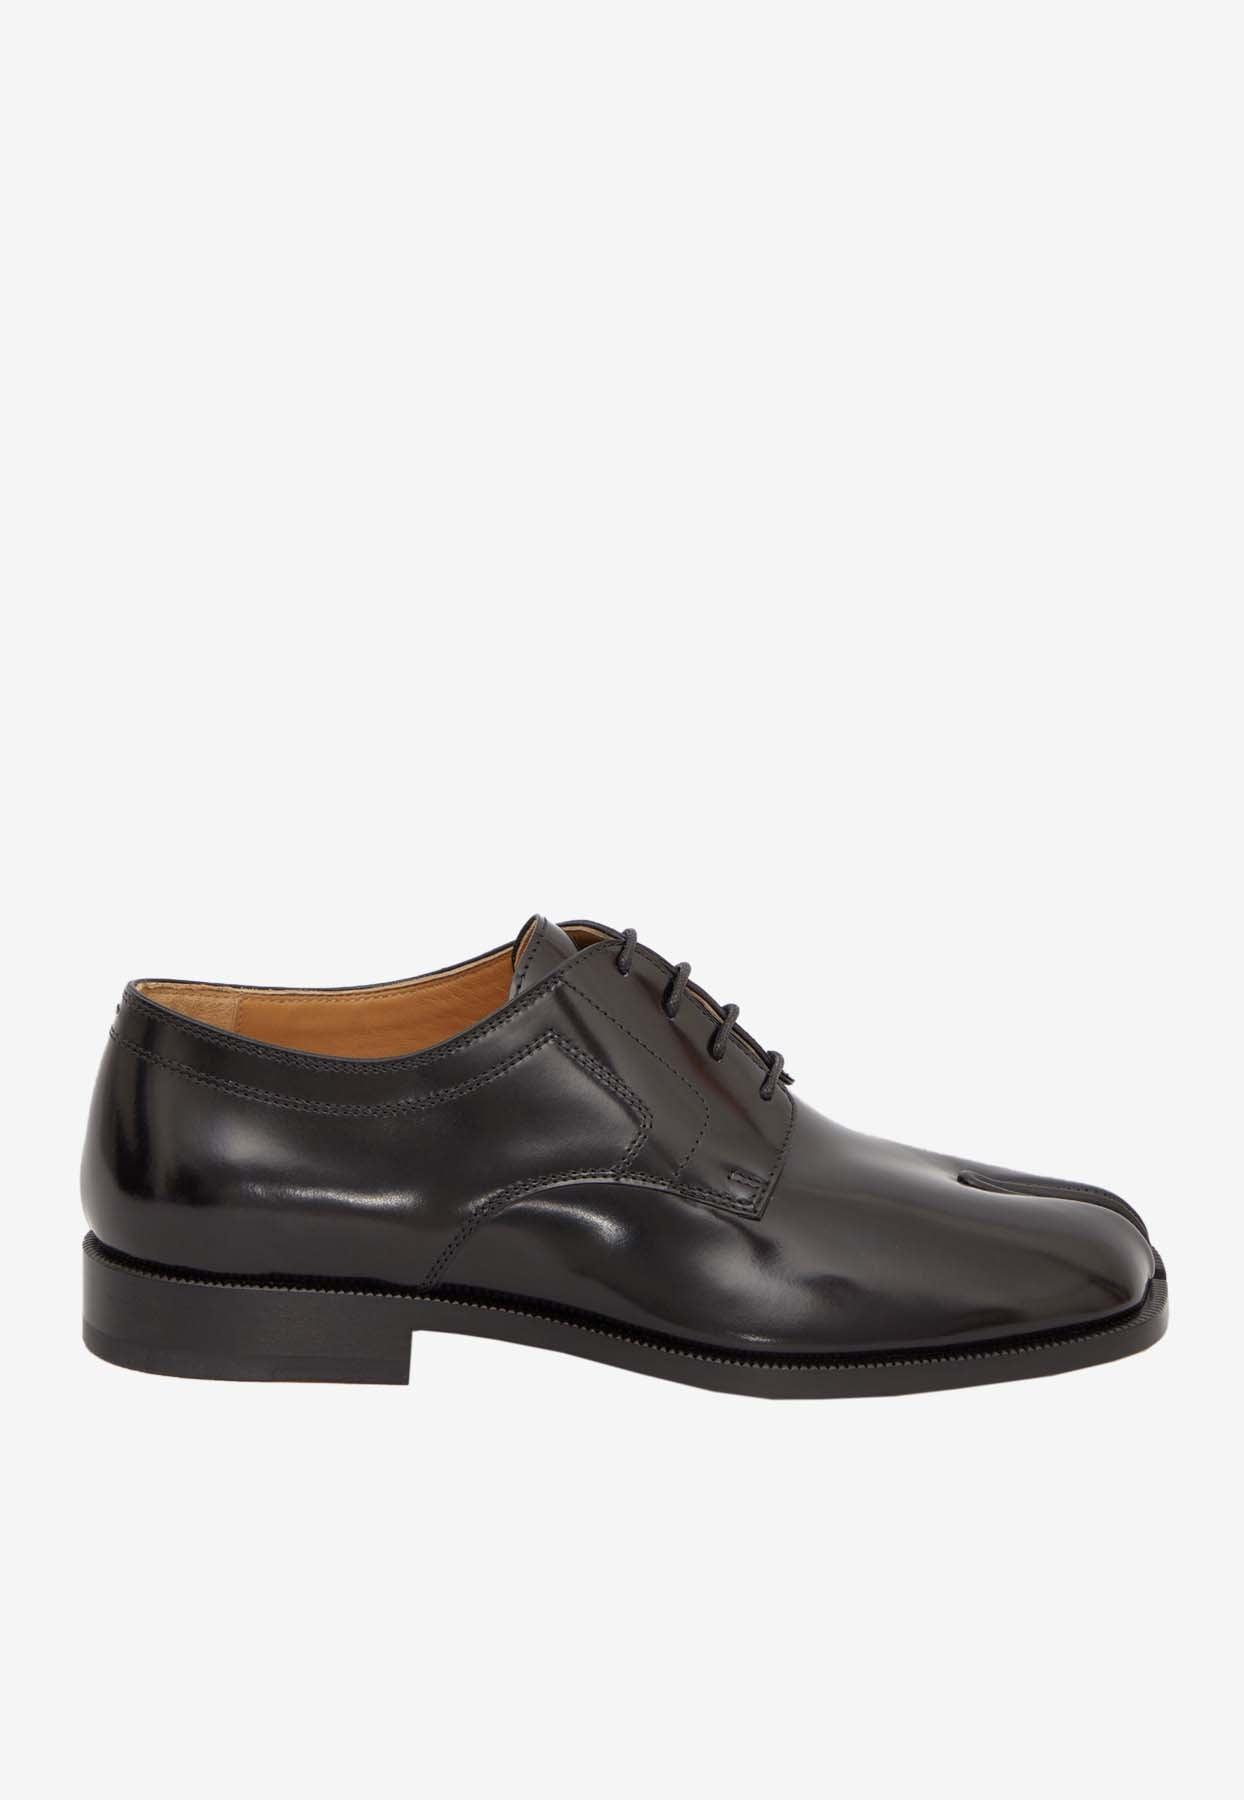 Maison Margiela Tabi Lace-up Derby Shoes In Leather in Brown for Men ...